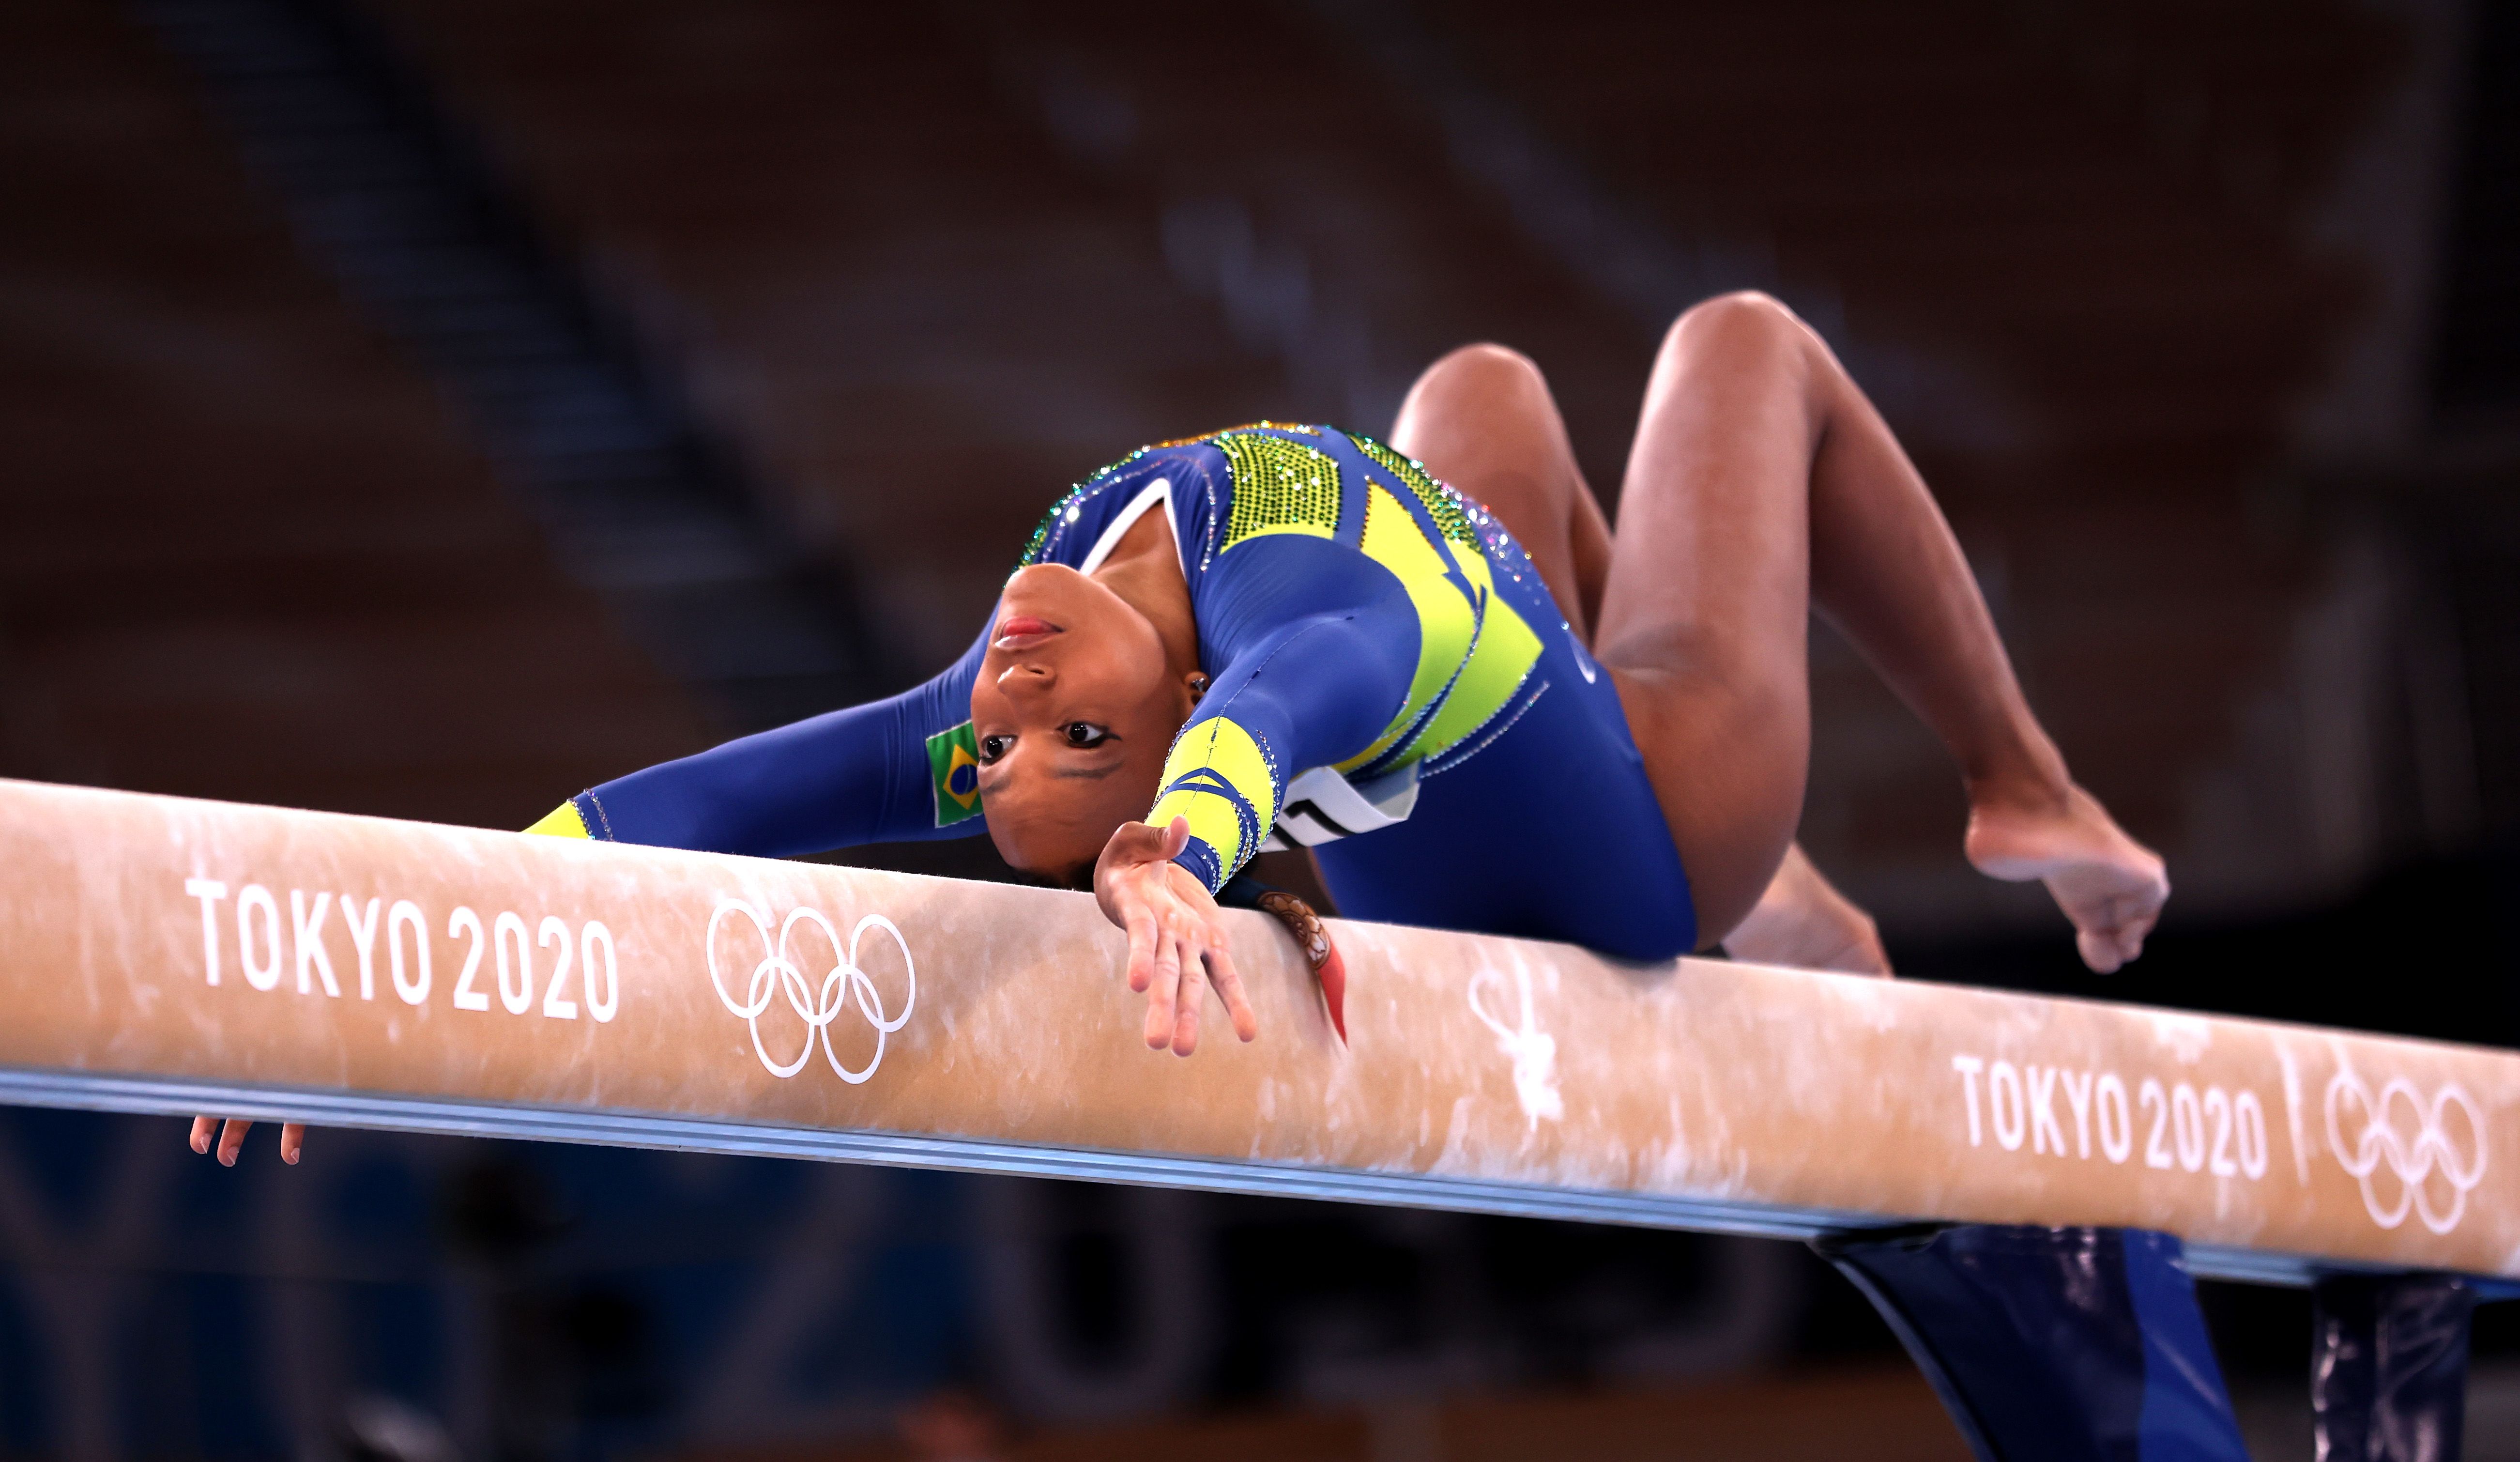 2 Minnesota gymnasts win team silver medals at Tokyo Olympics